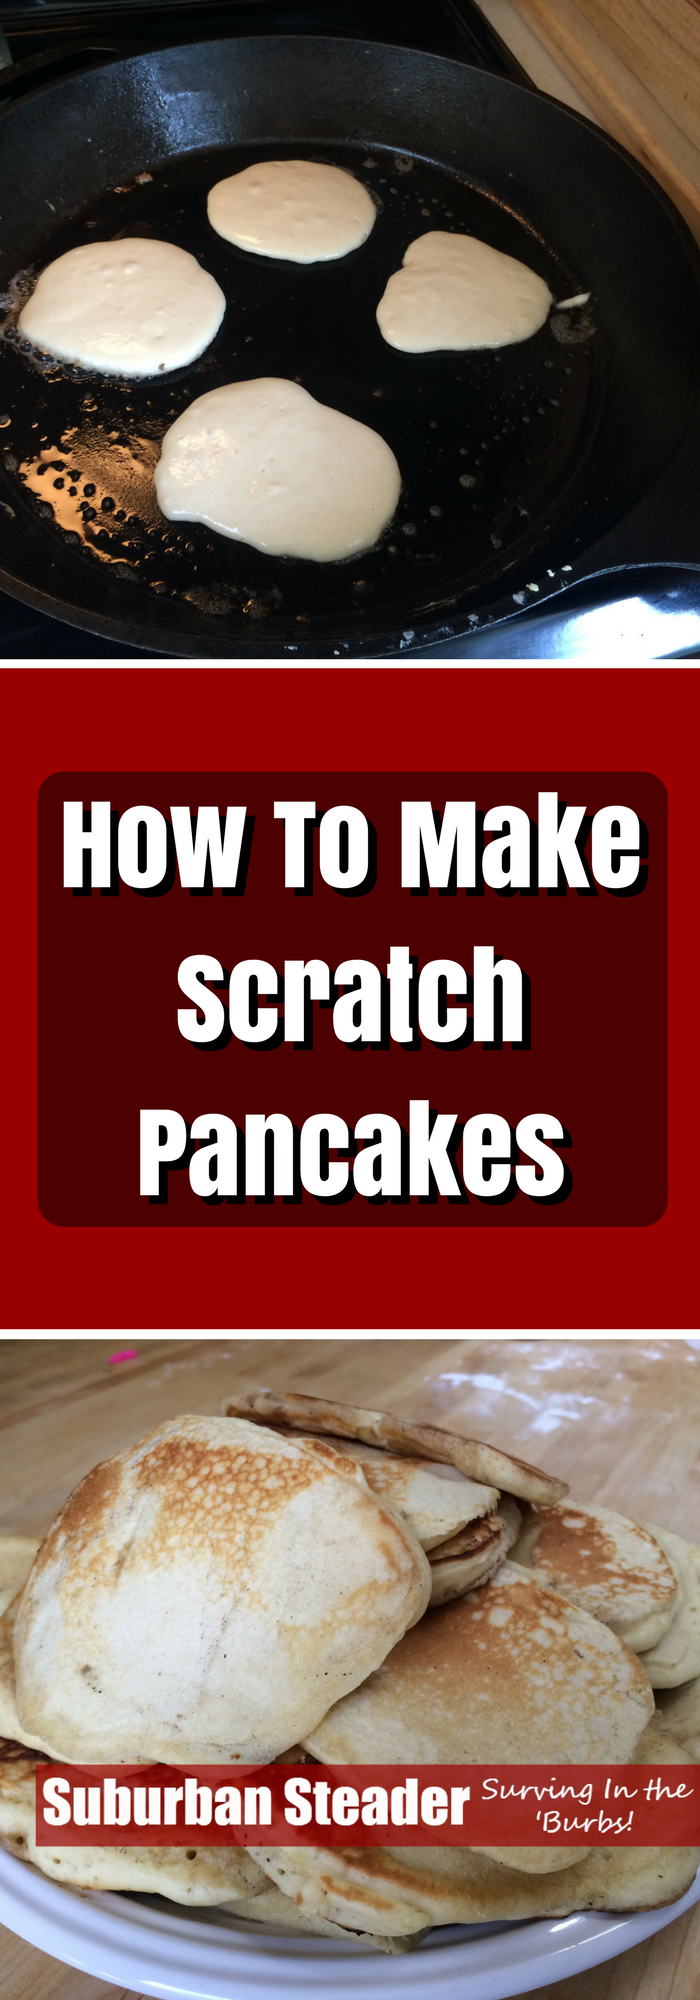 How To Make Scratch Pancakes